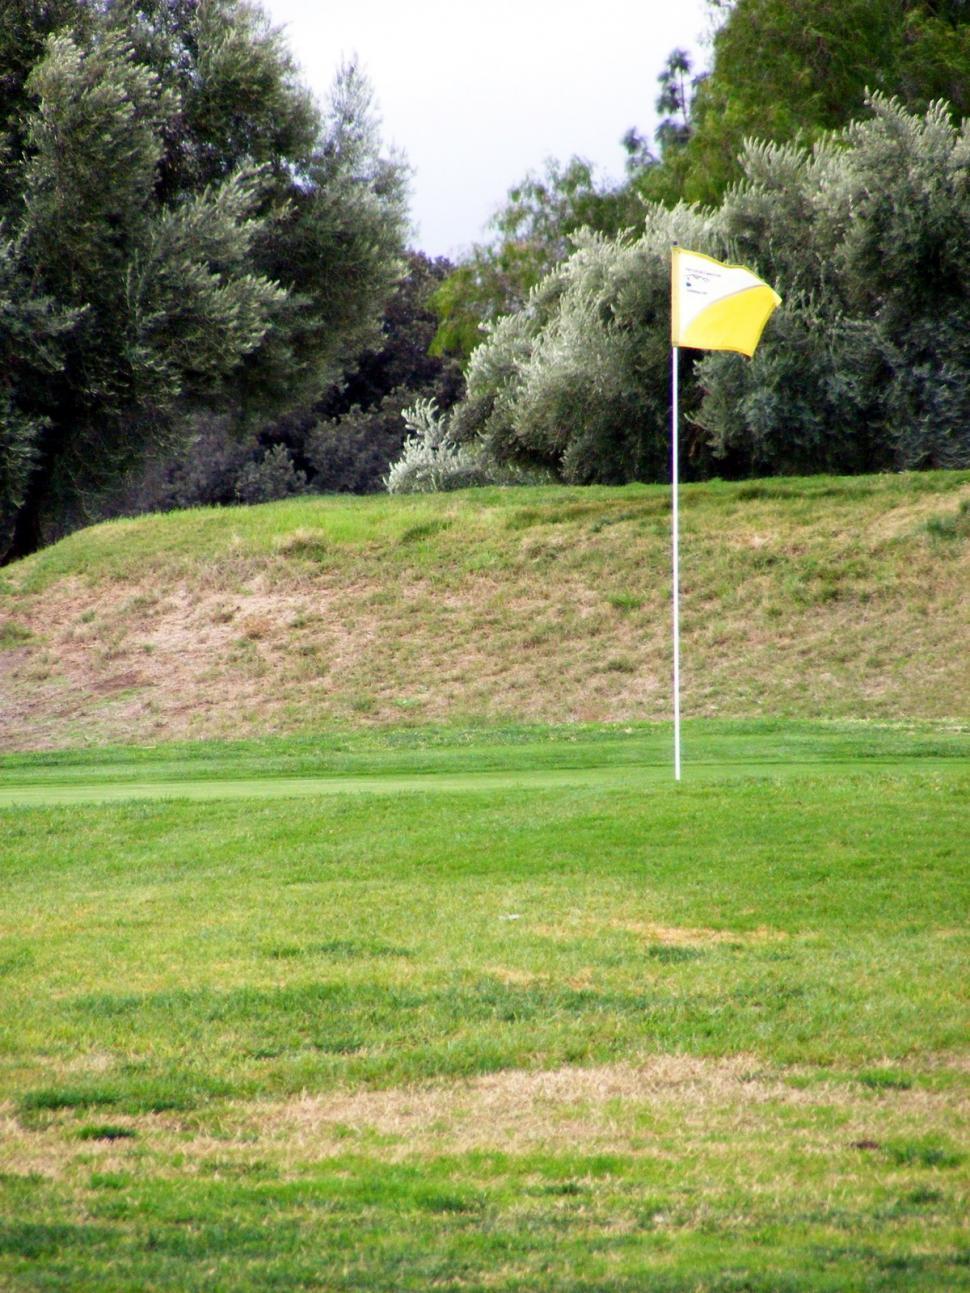 Free Image of Golf Course 